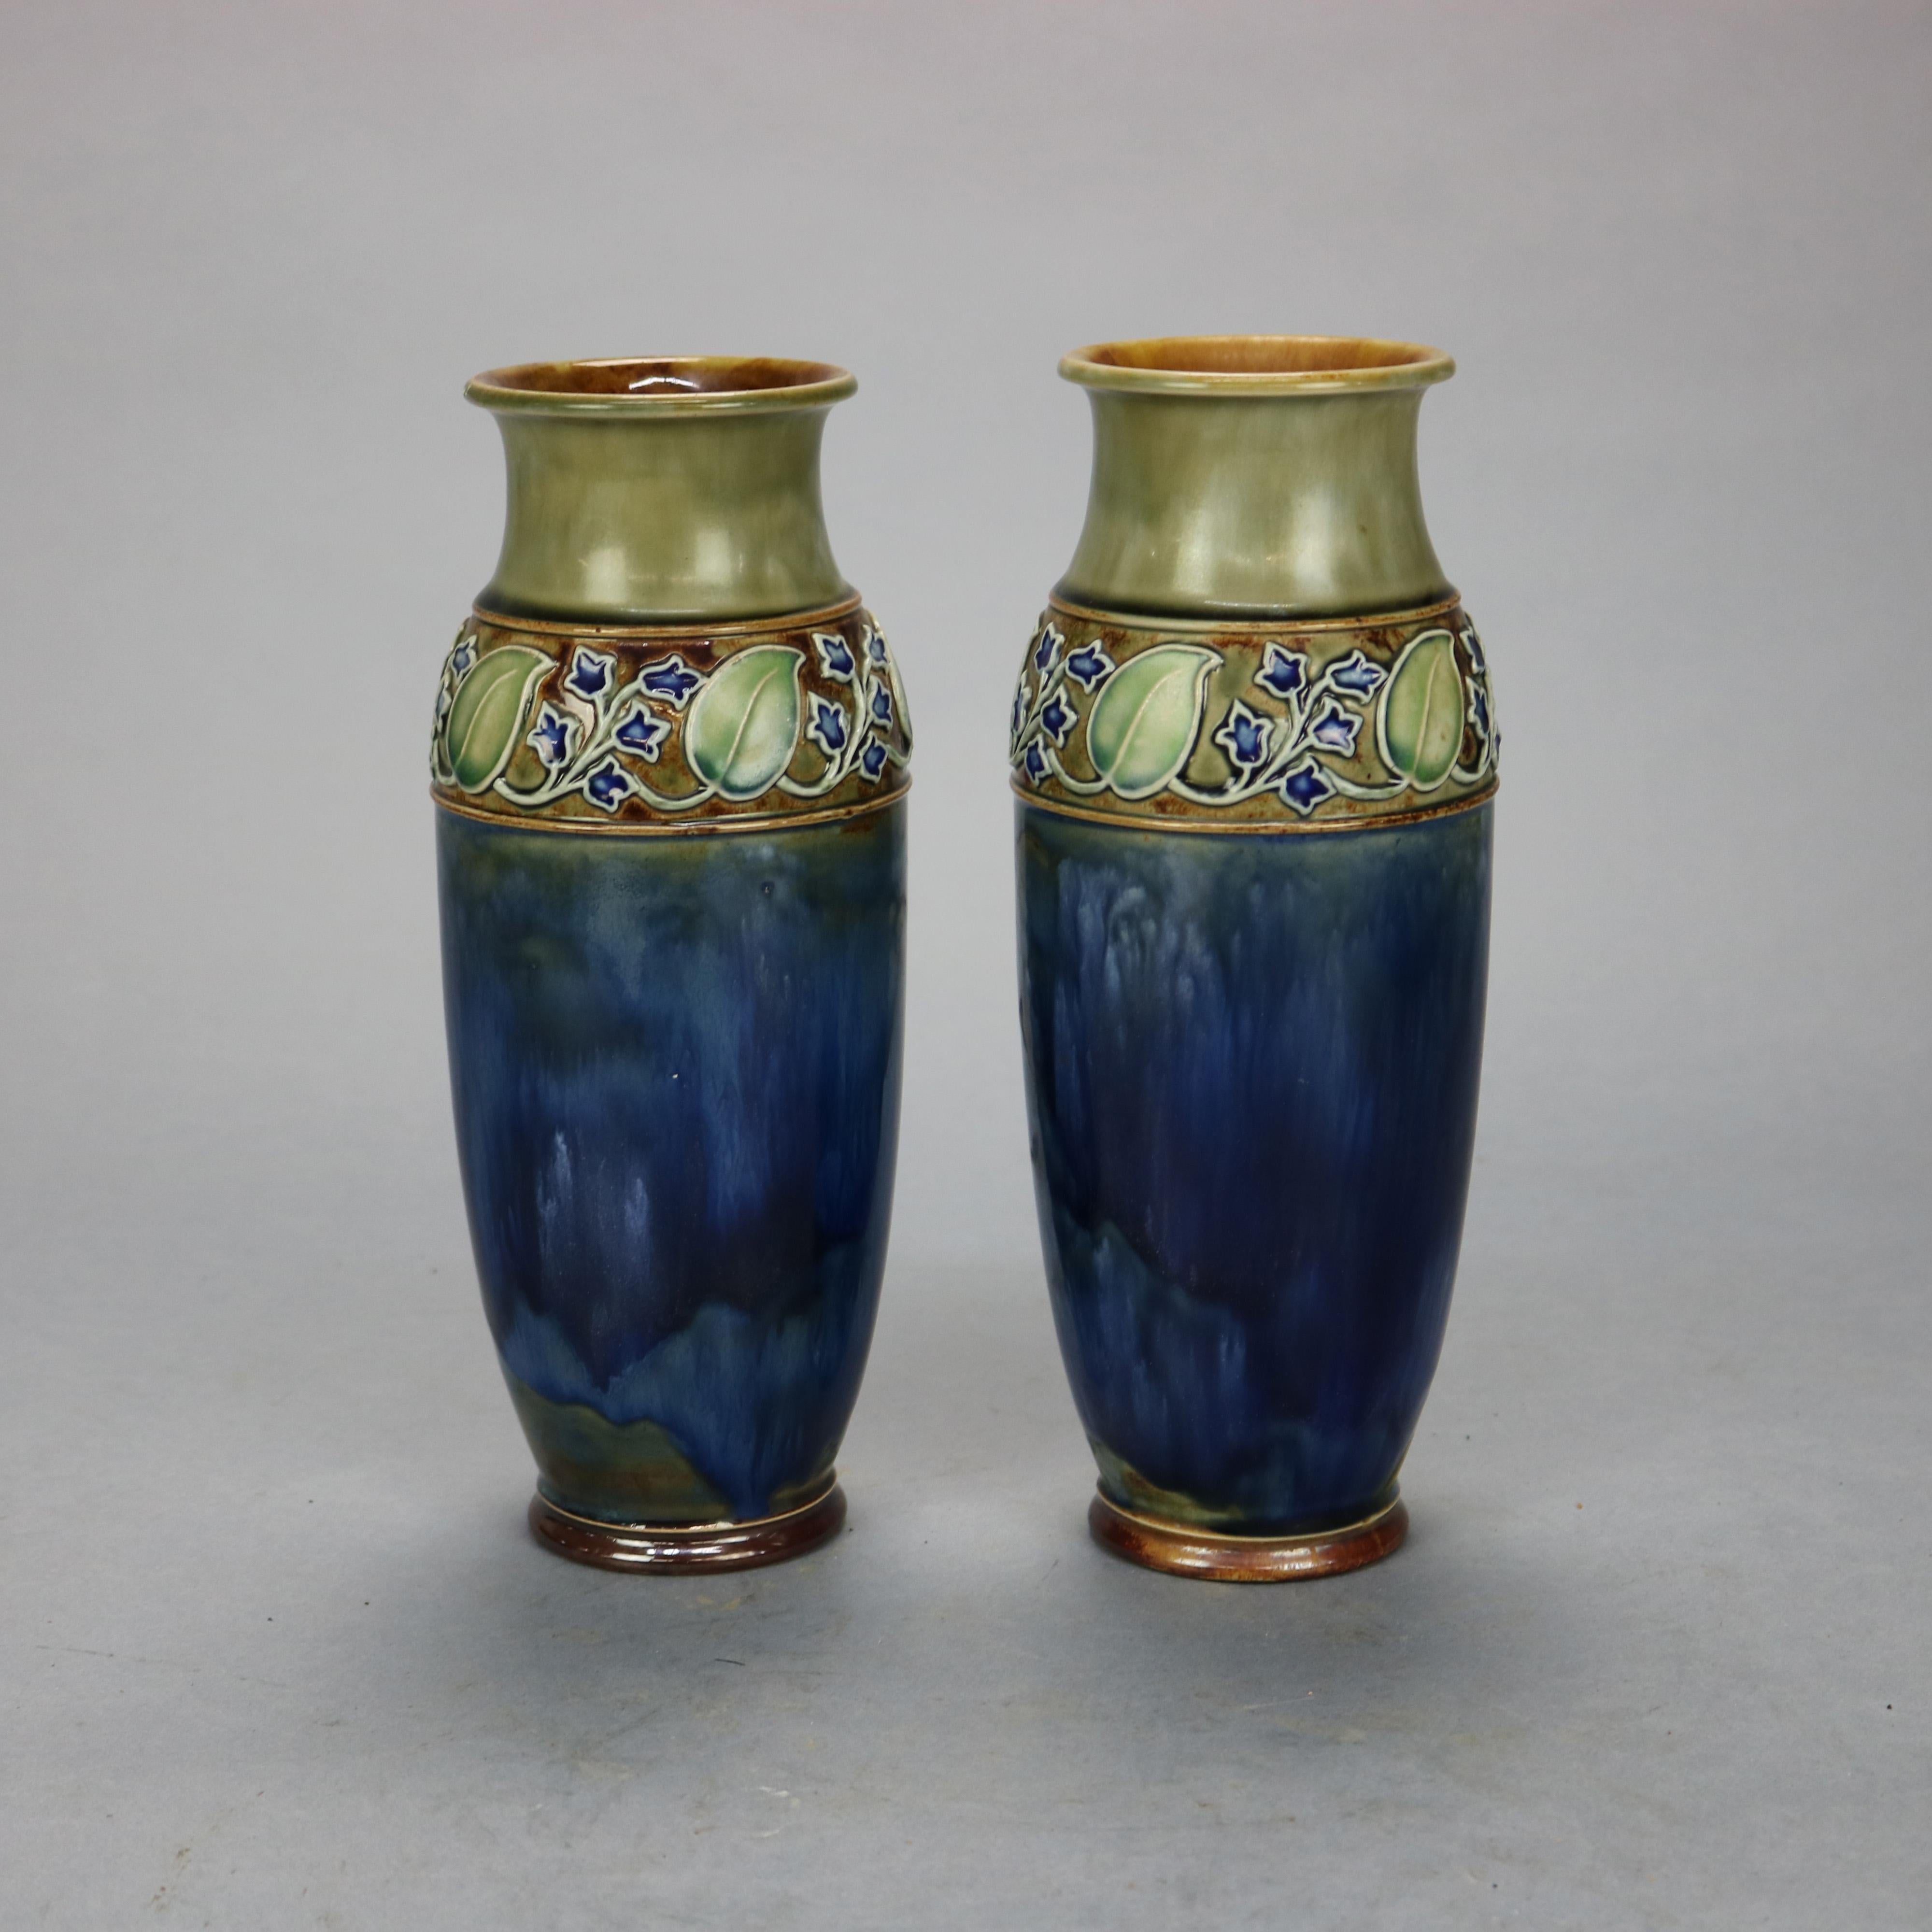 20th Century Antique Pair of Royal Doulton Arts & Crafts Pottery Vases, Circa 1910